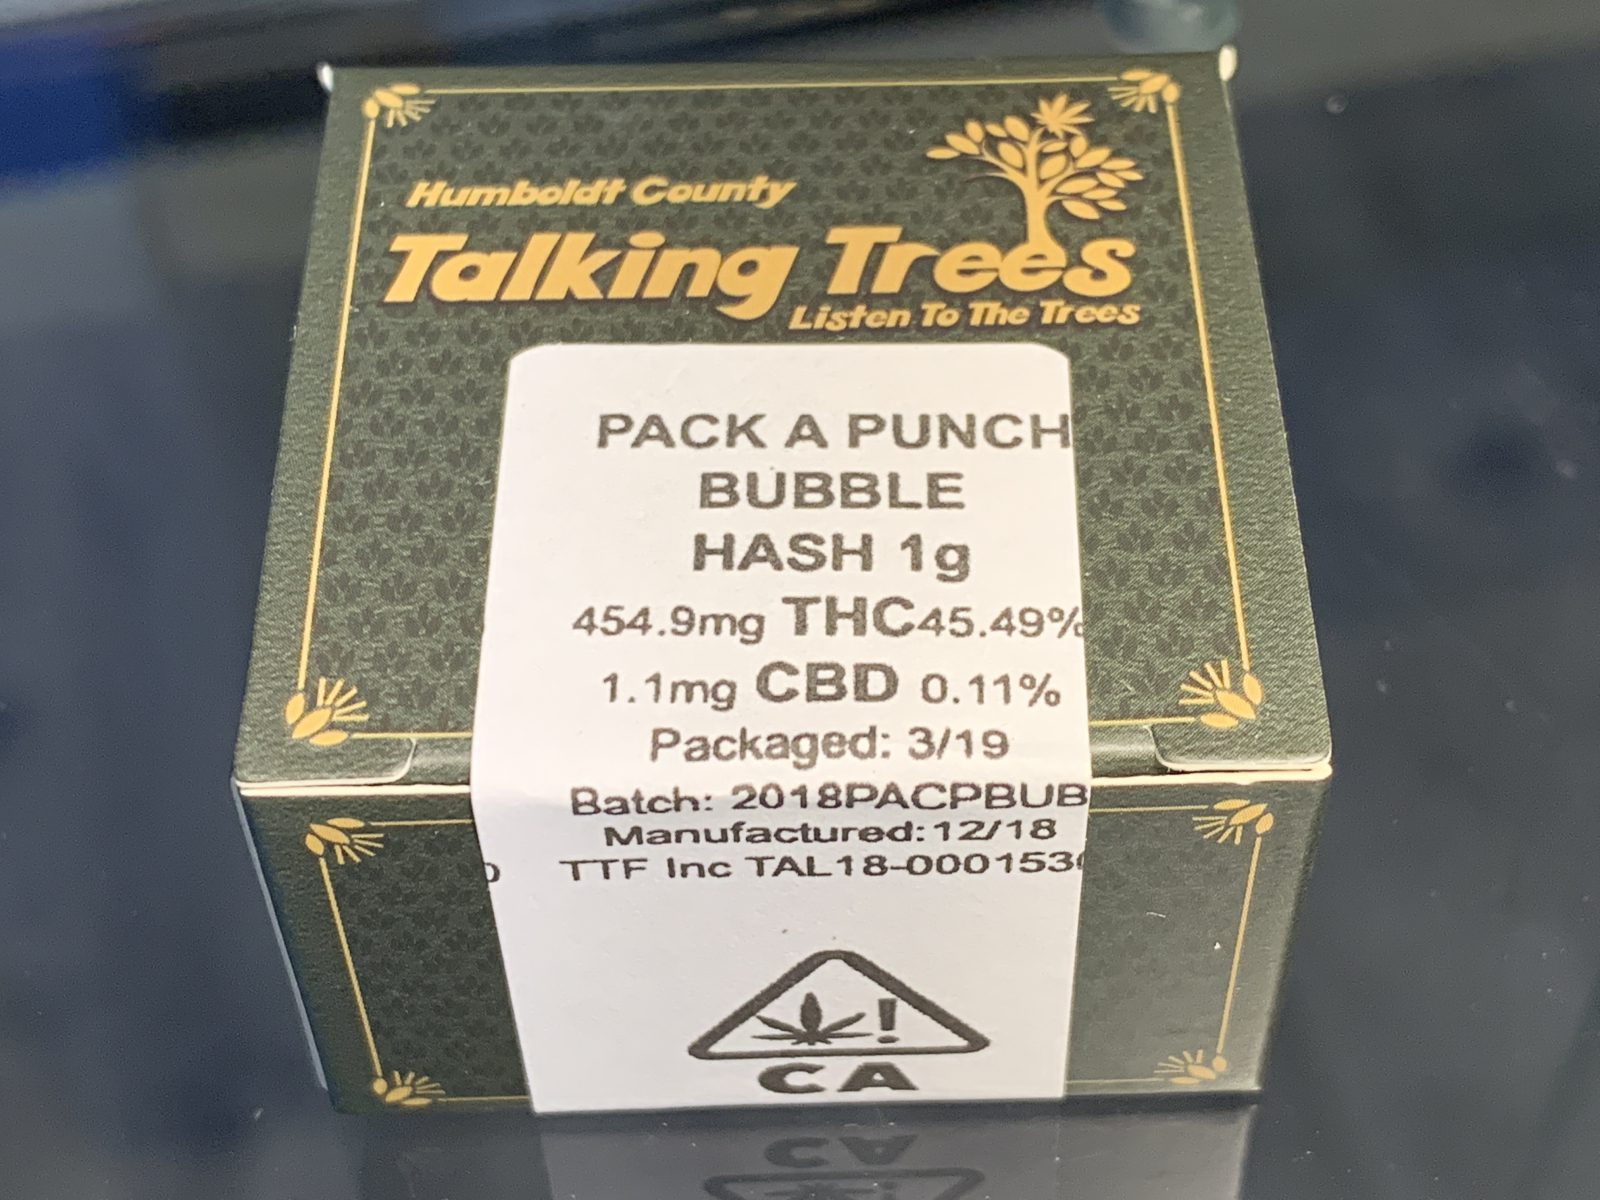 Talking tree farms pack a punch bubble hash